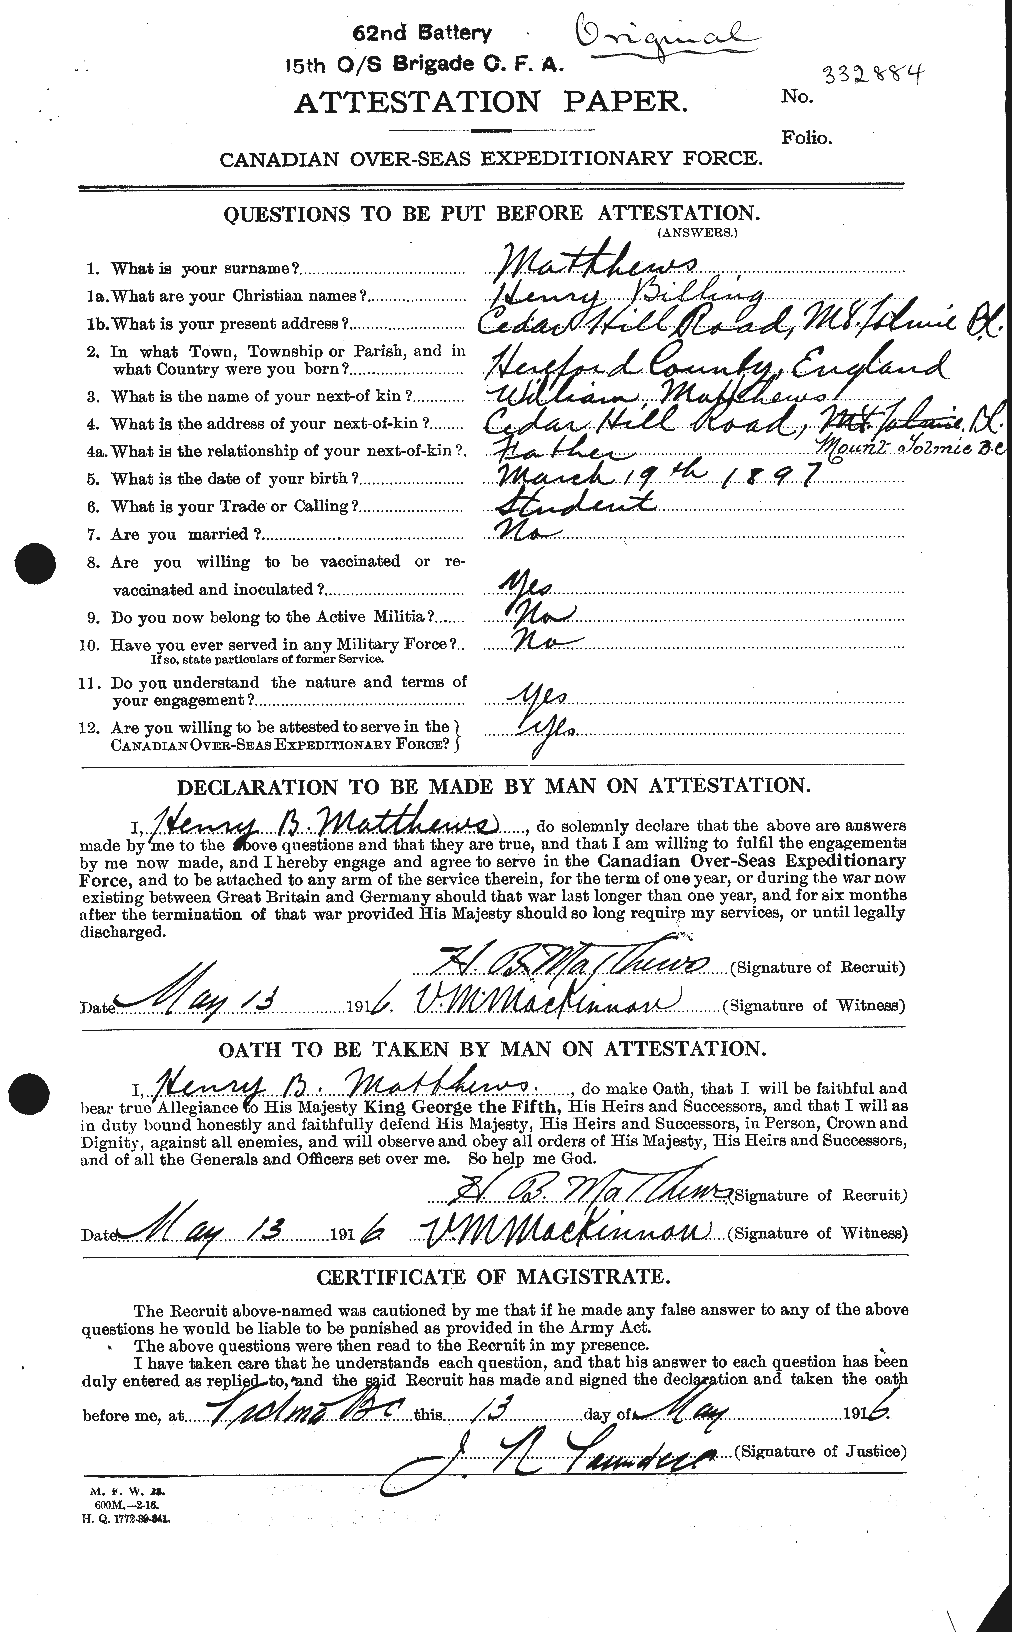 Personnel Records of the First World War - CEF 491172a